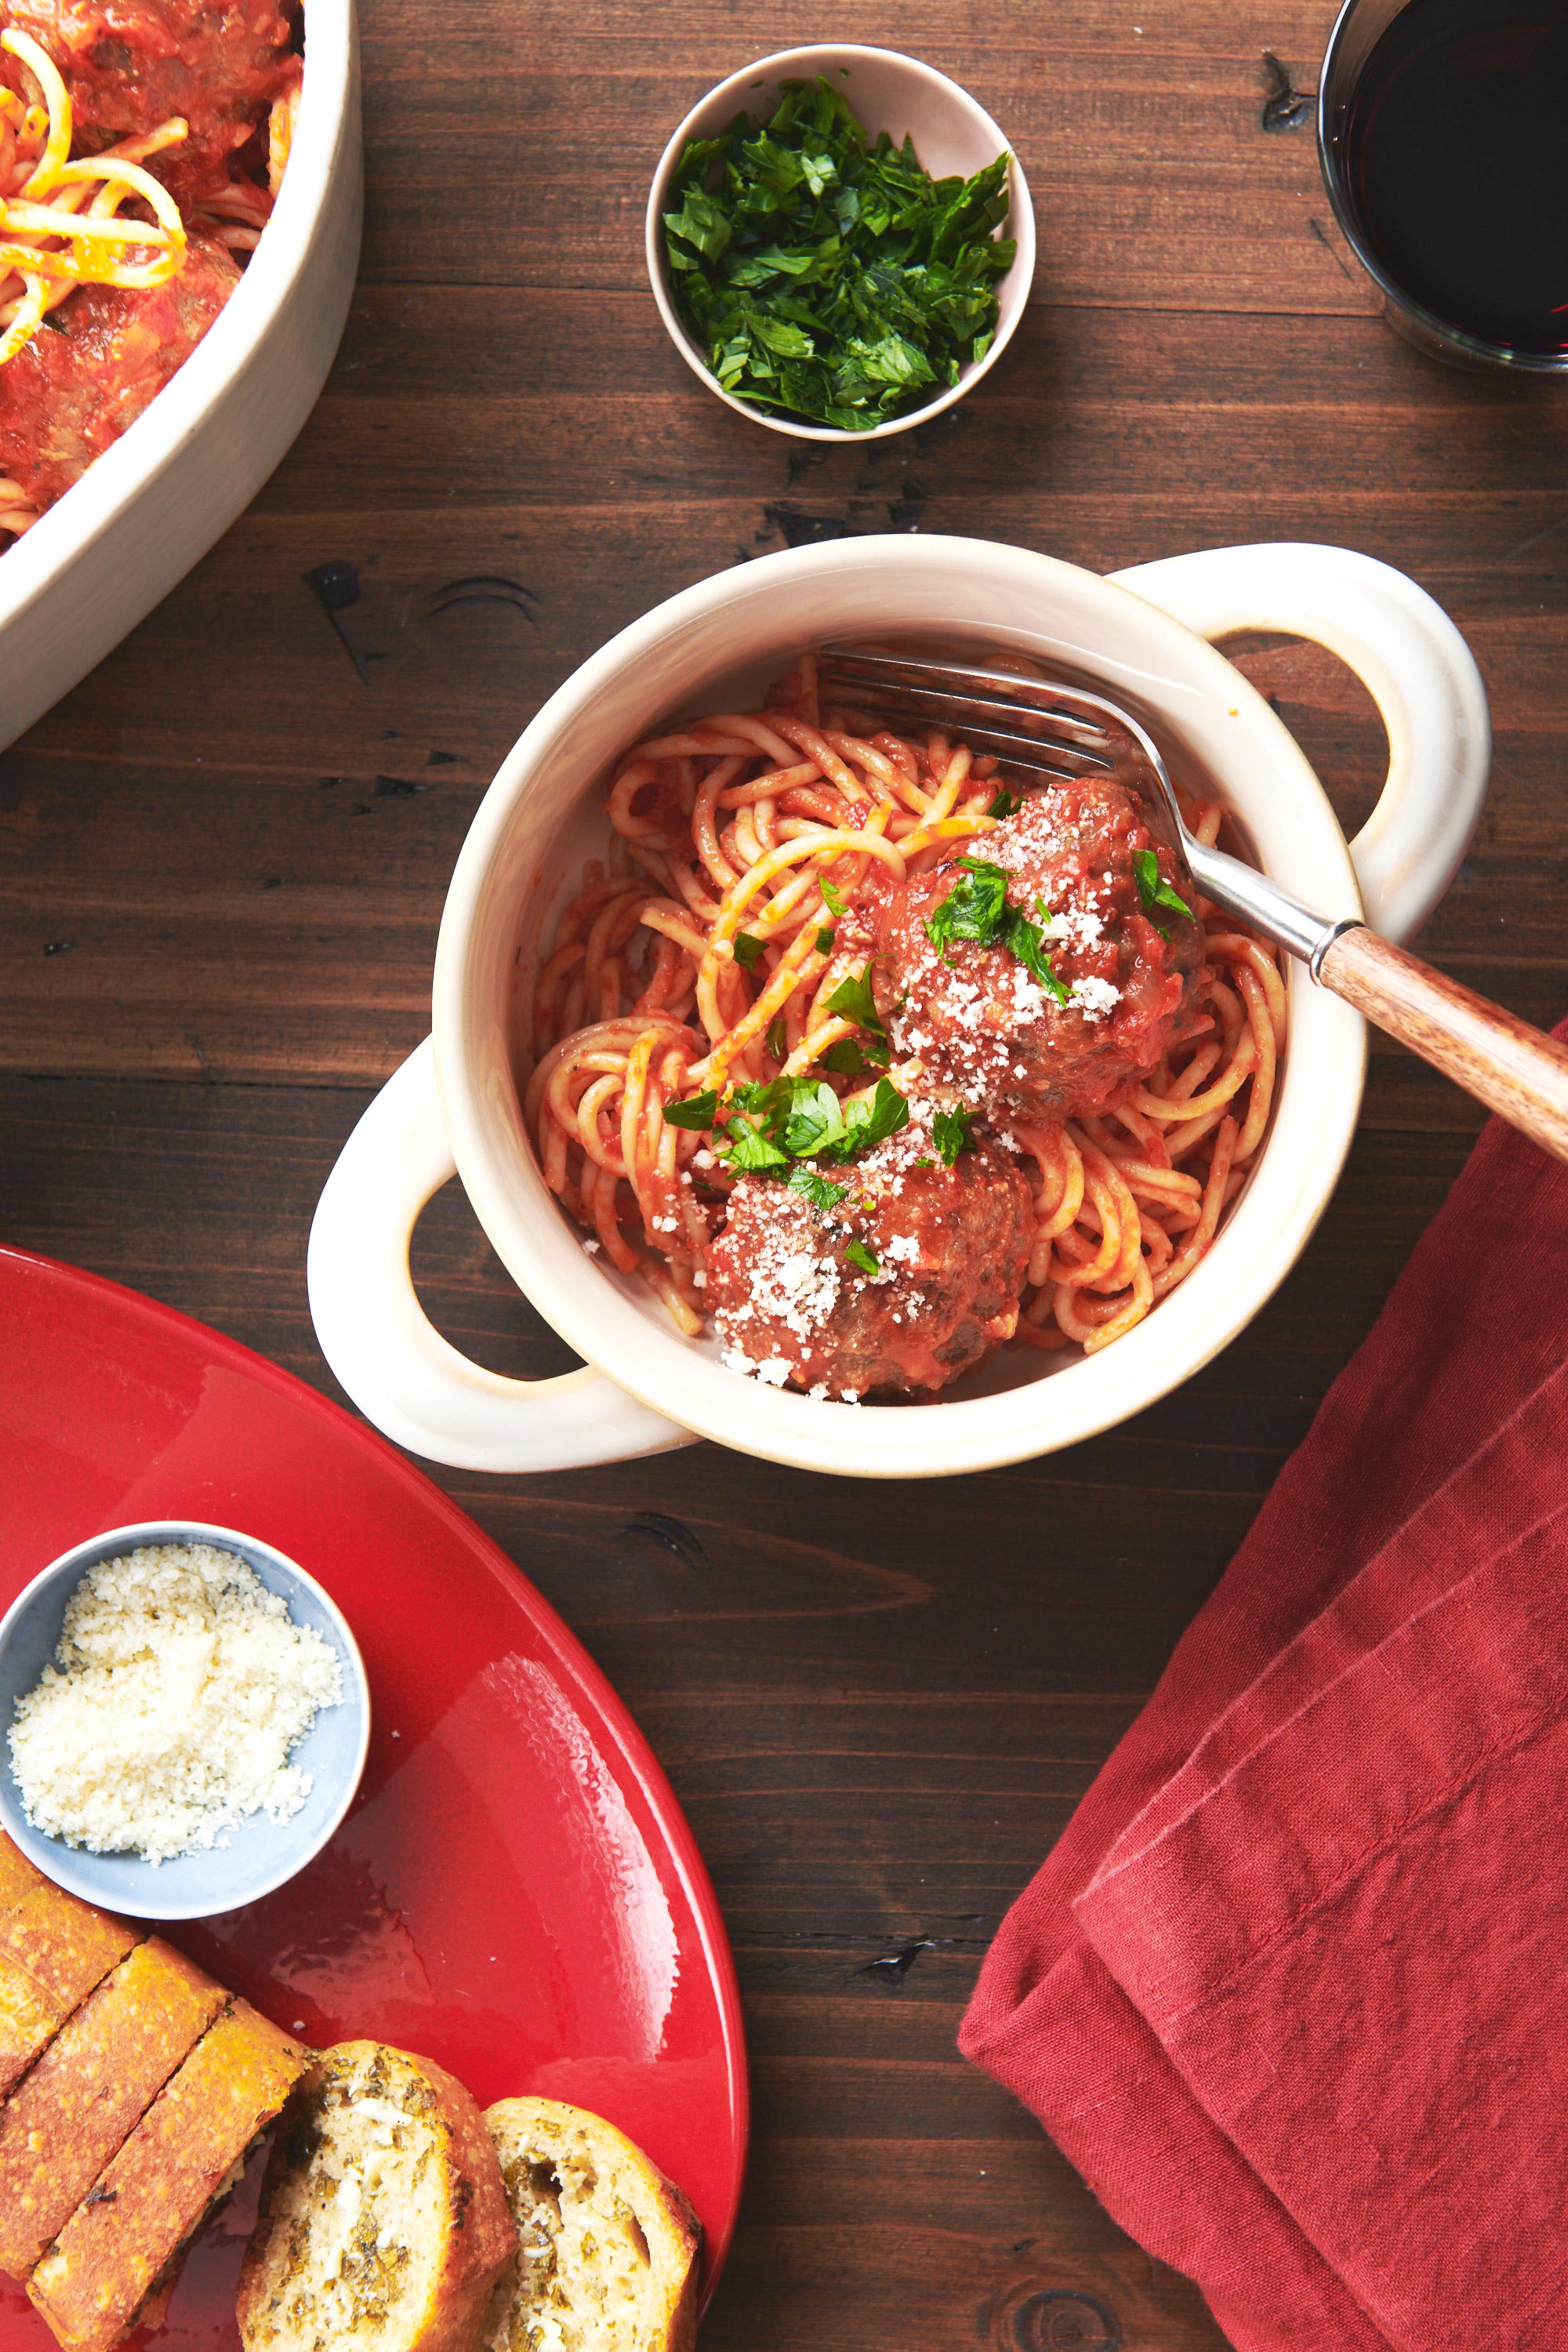 Handled bowl of Spaghetti and Meatballs with Tomato Sauce.